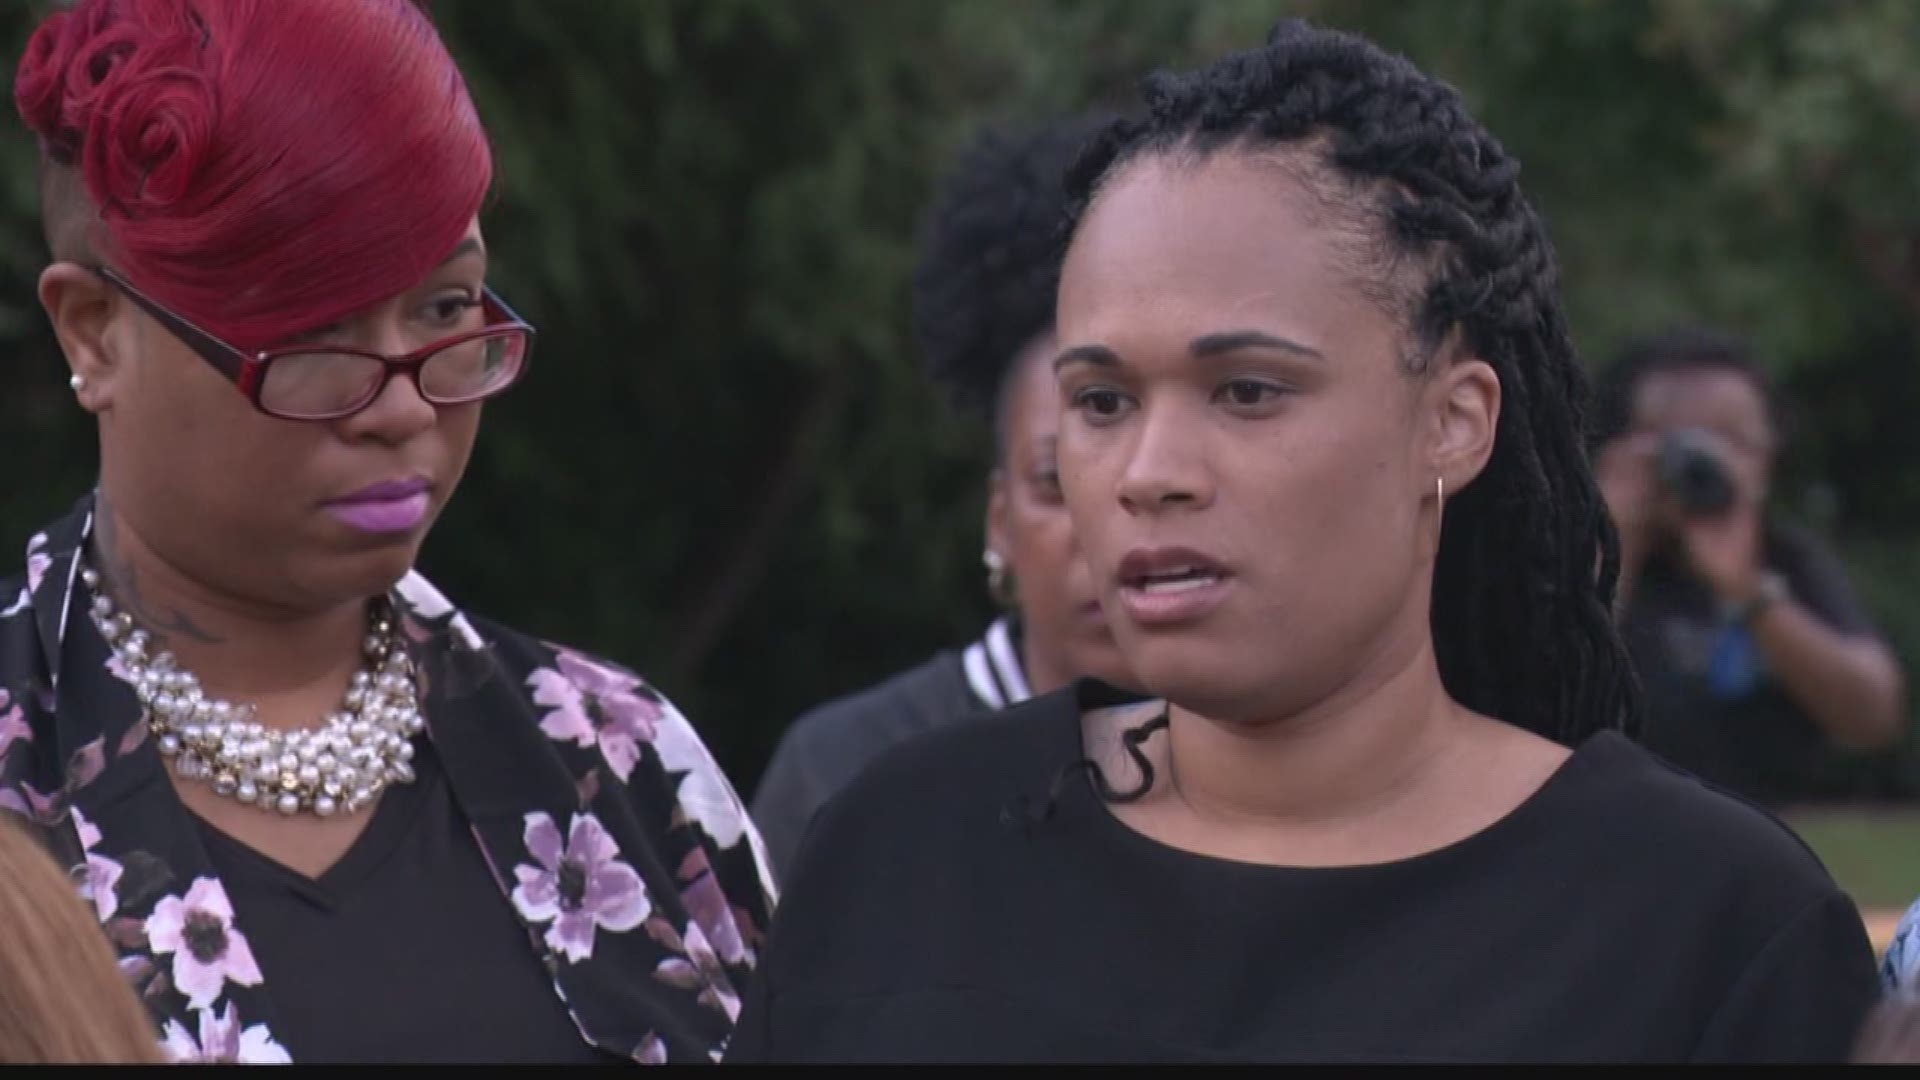 Brandy and Meltony Billie talked about the loss of their daughter, Ashanti, after police in Charlotte, N.C. found her remains. Billie last was seen alive in Hampton Roads on September 18, 2017.